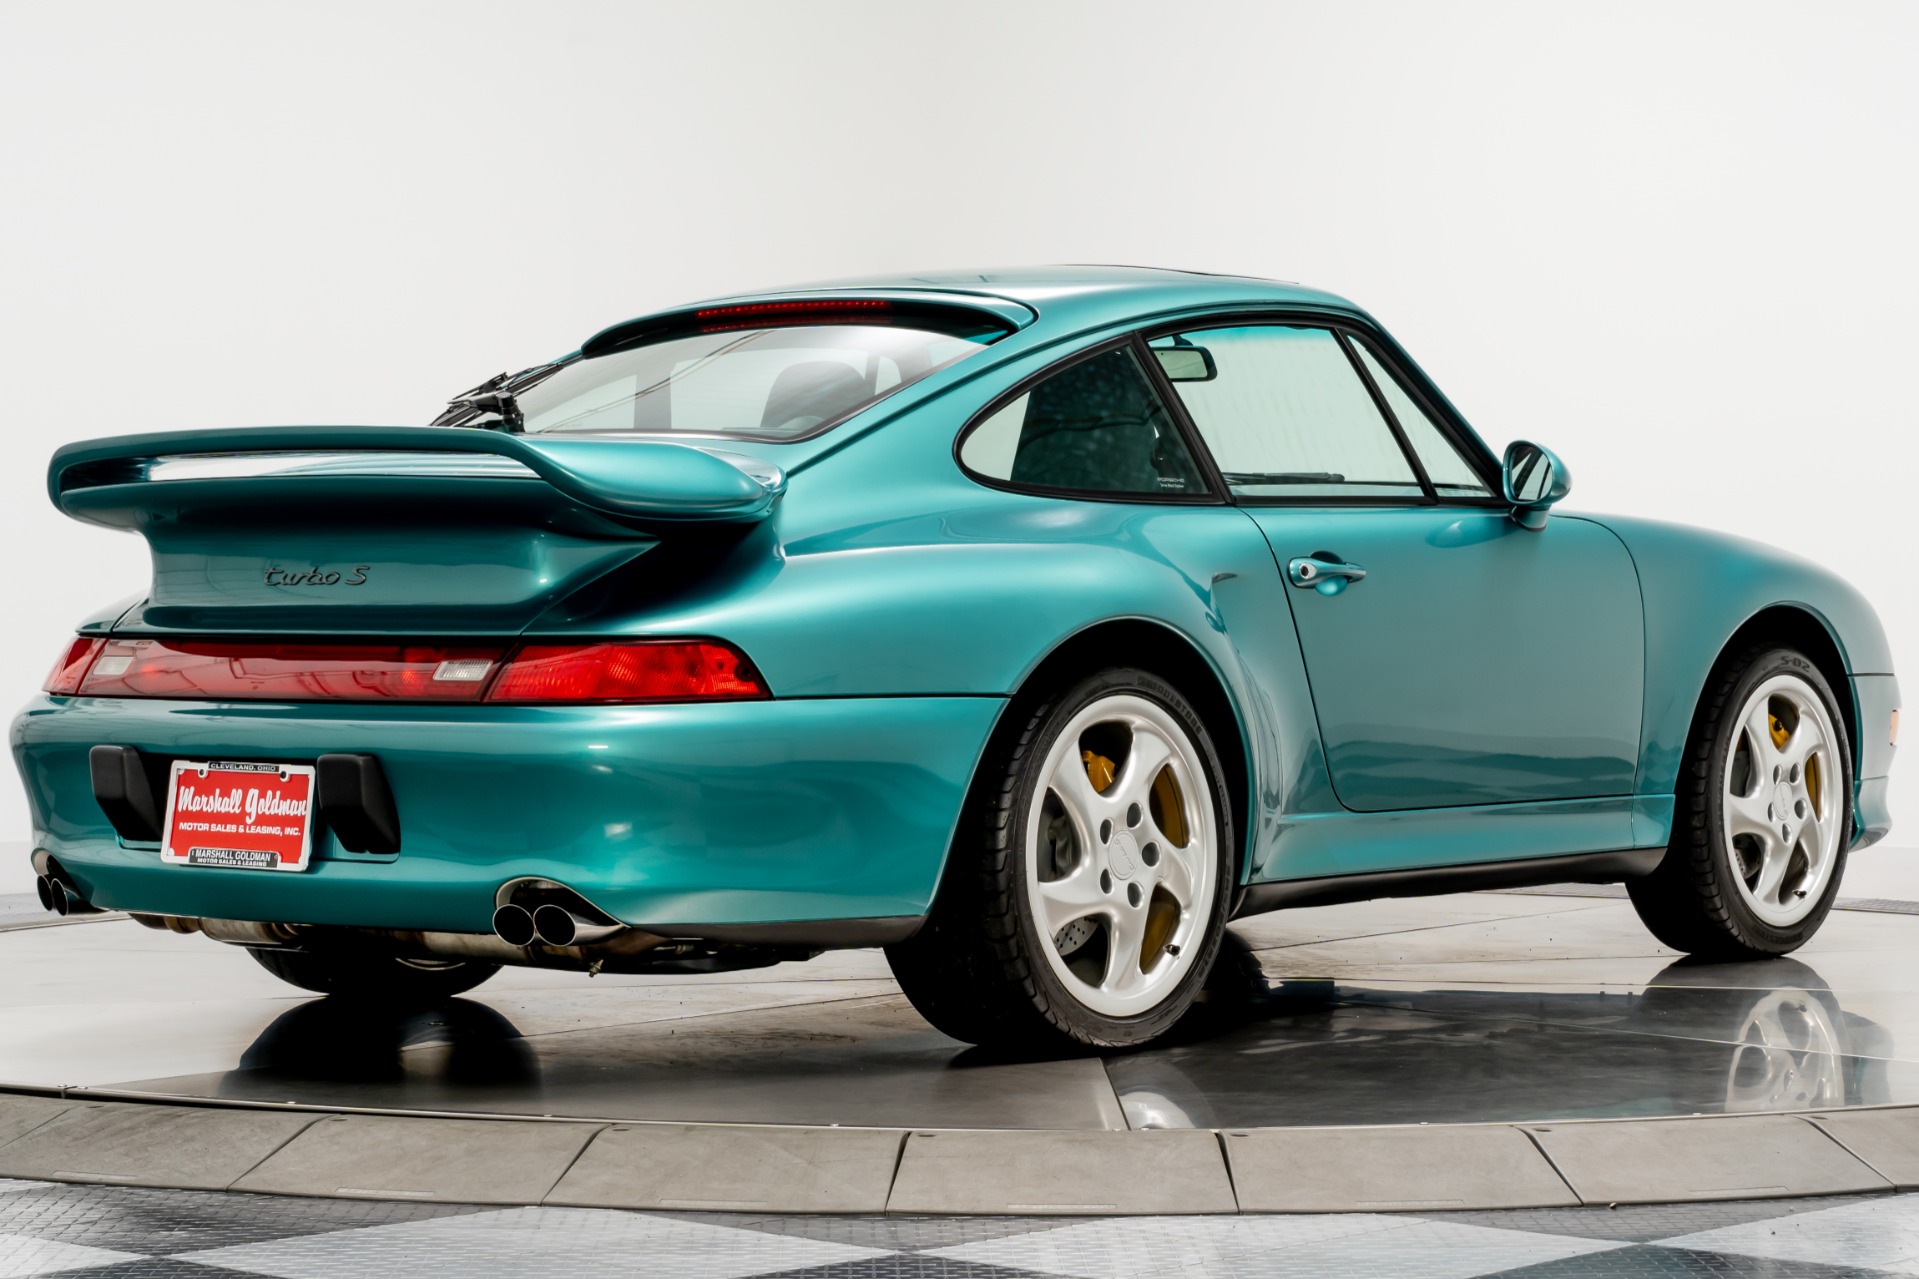 Used 1997 Porsche 911 Turbo S For Sale (Sold) | Marshall Goldman 